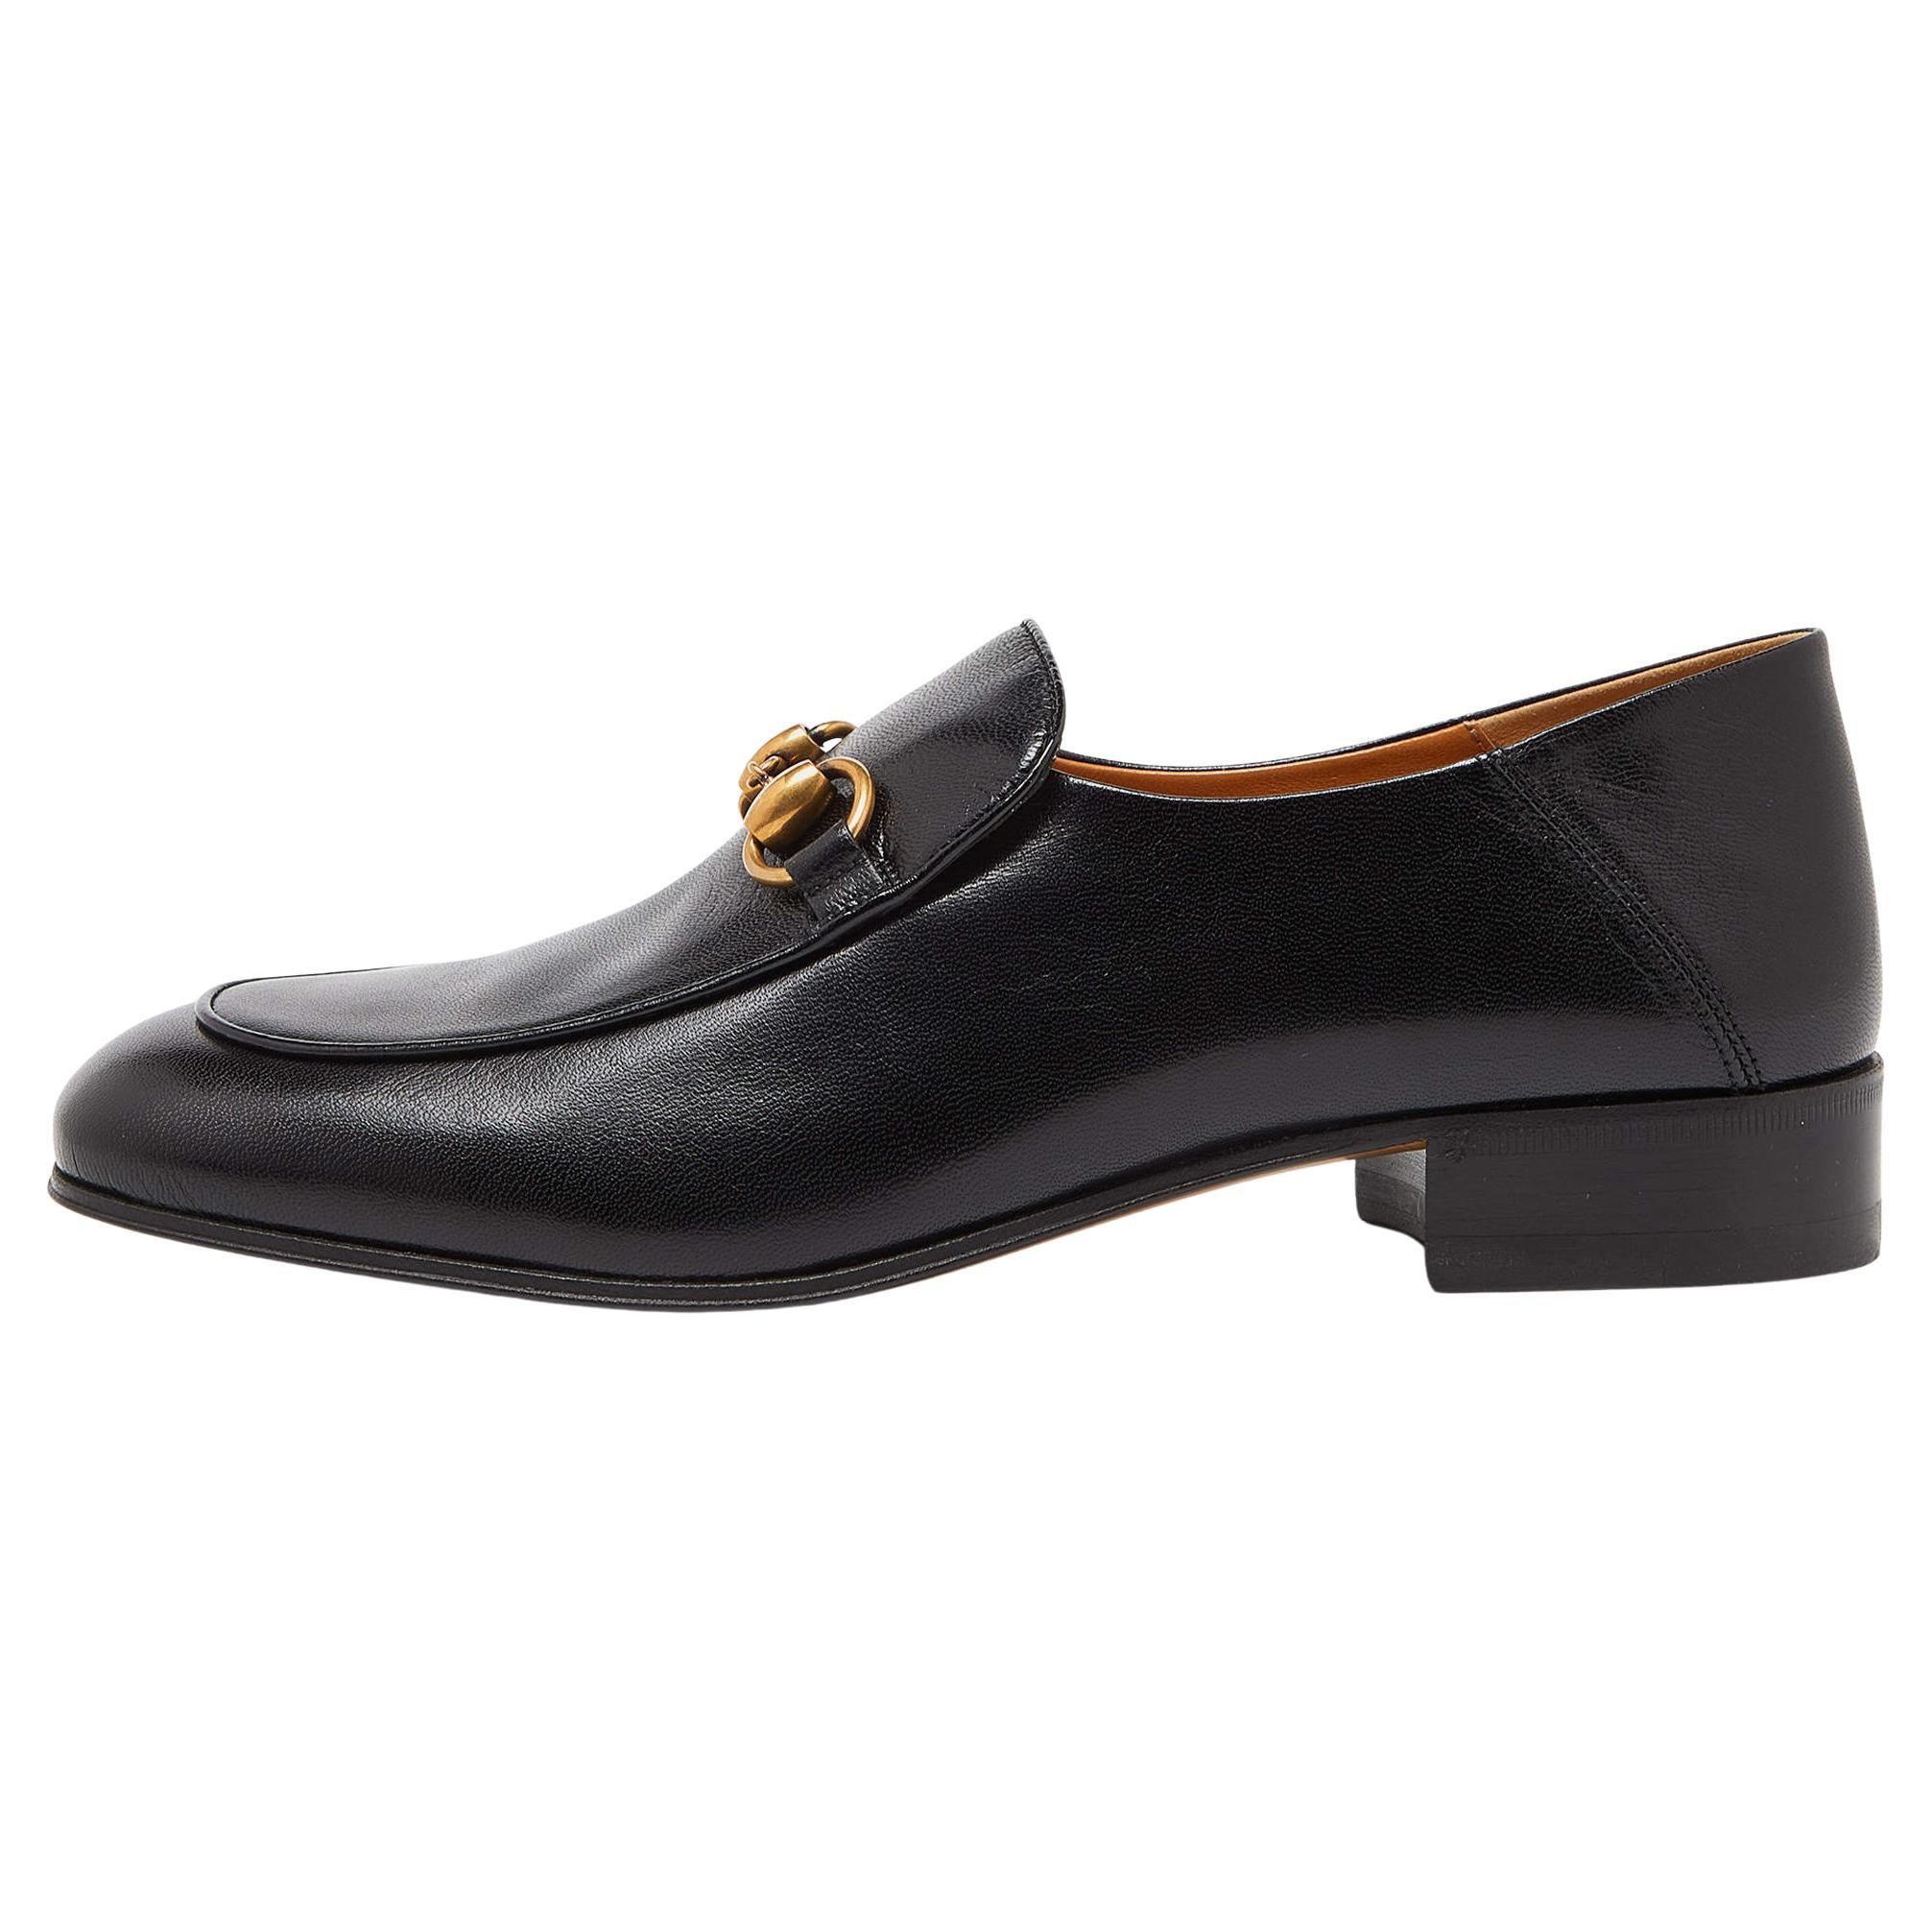 Gucci Black Leather Horsebit Loafers Size 38.5 For Sale